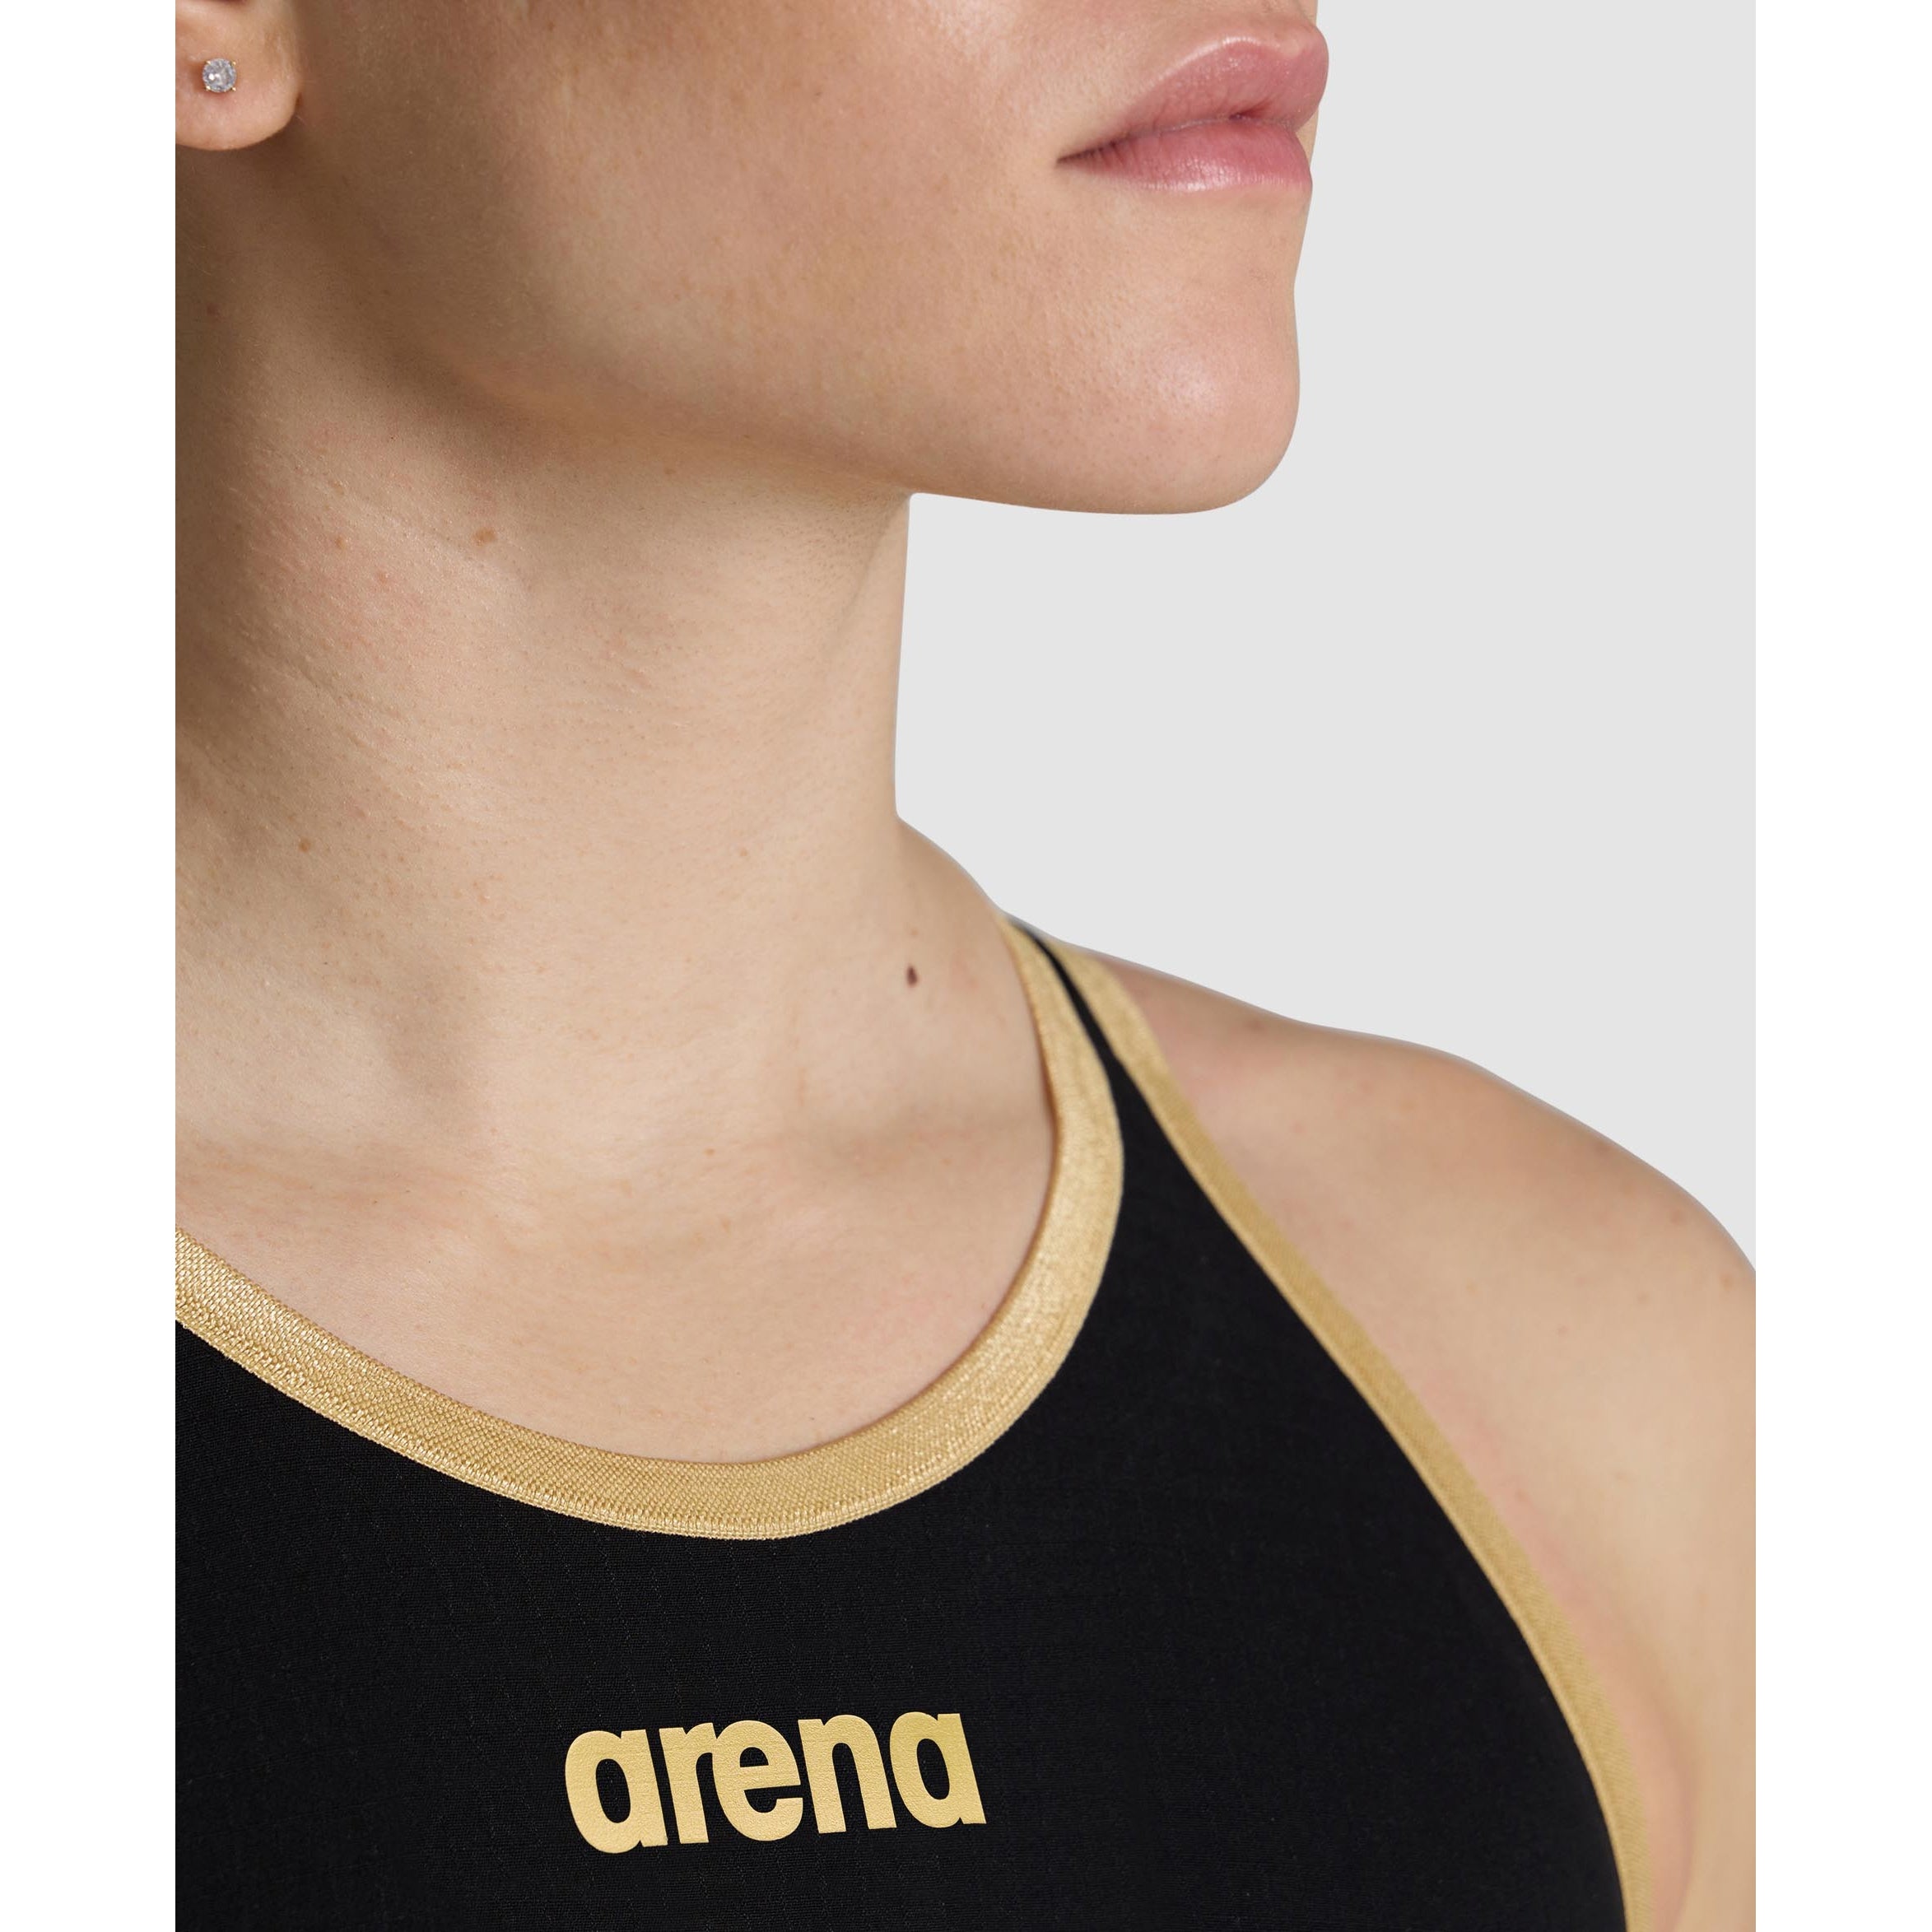 Arena POWERSKIN Carbon Core FX Open Back